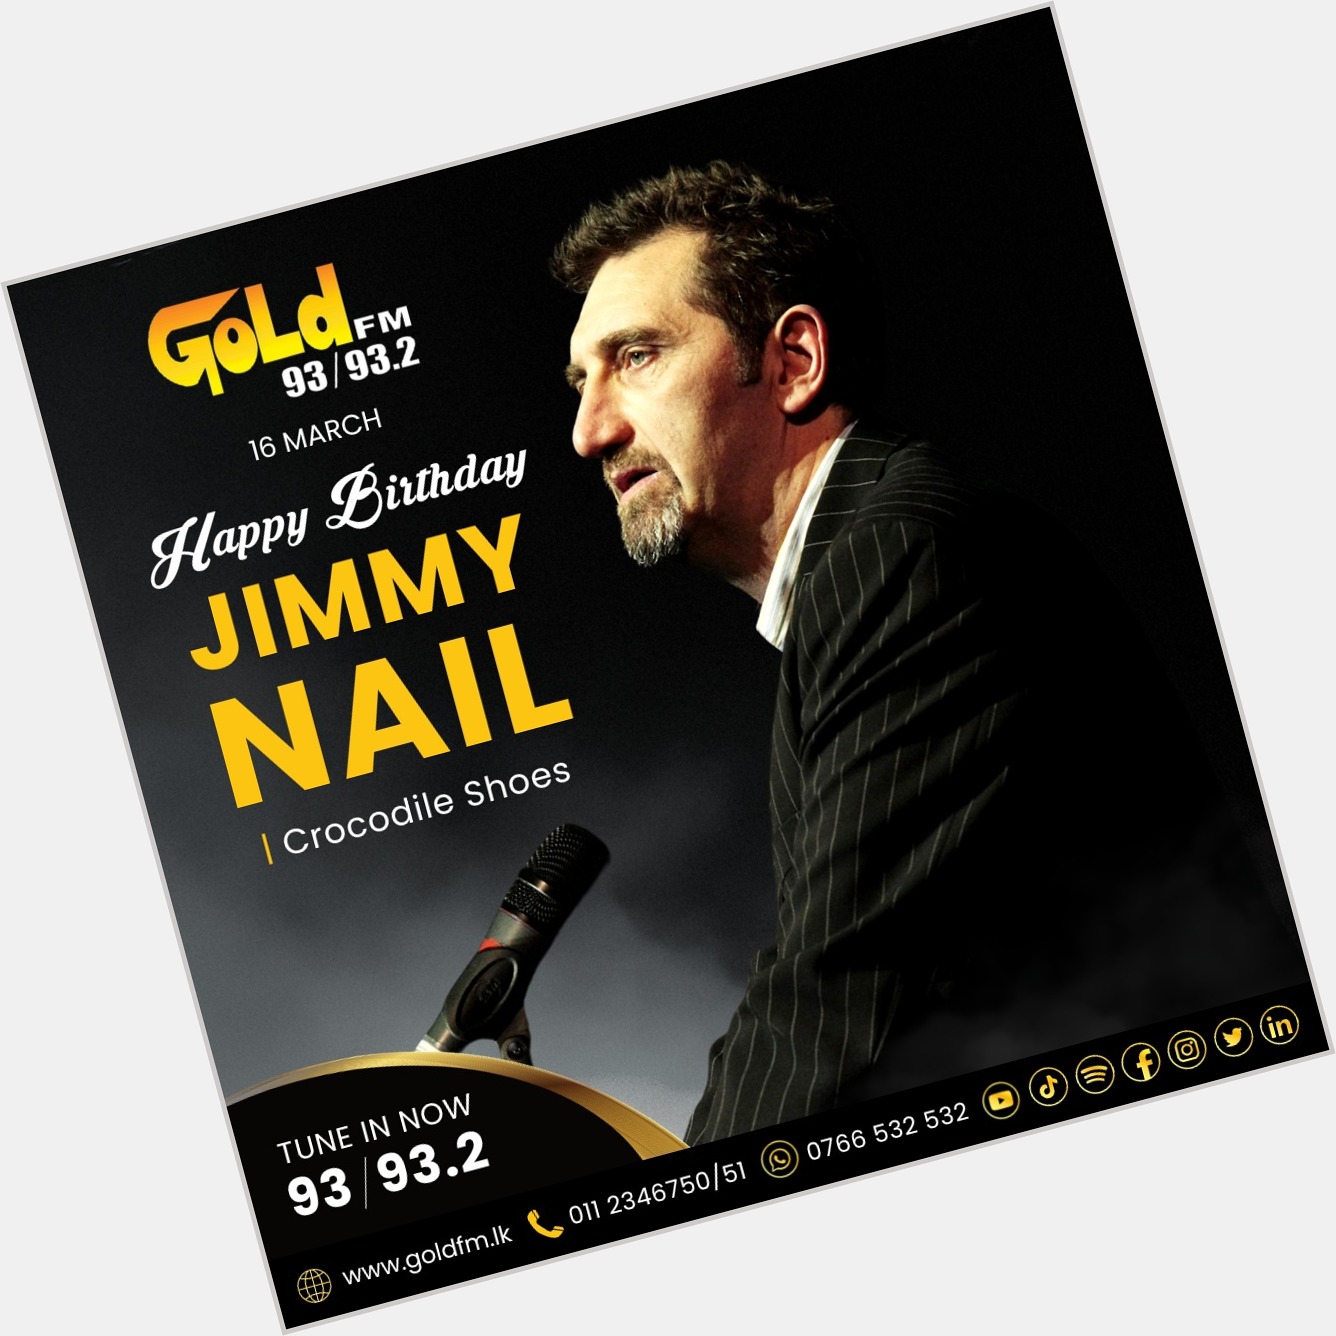 HAPPY BIRTHDAY TO JIMMY NAIL TUNE IN NOW 93 / 93.2 Island wide      